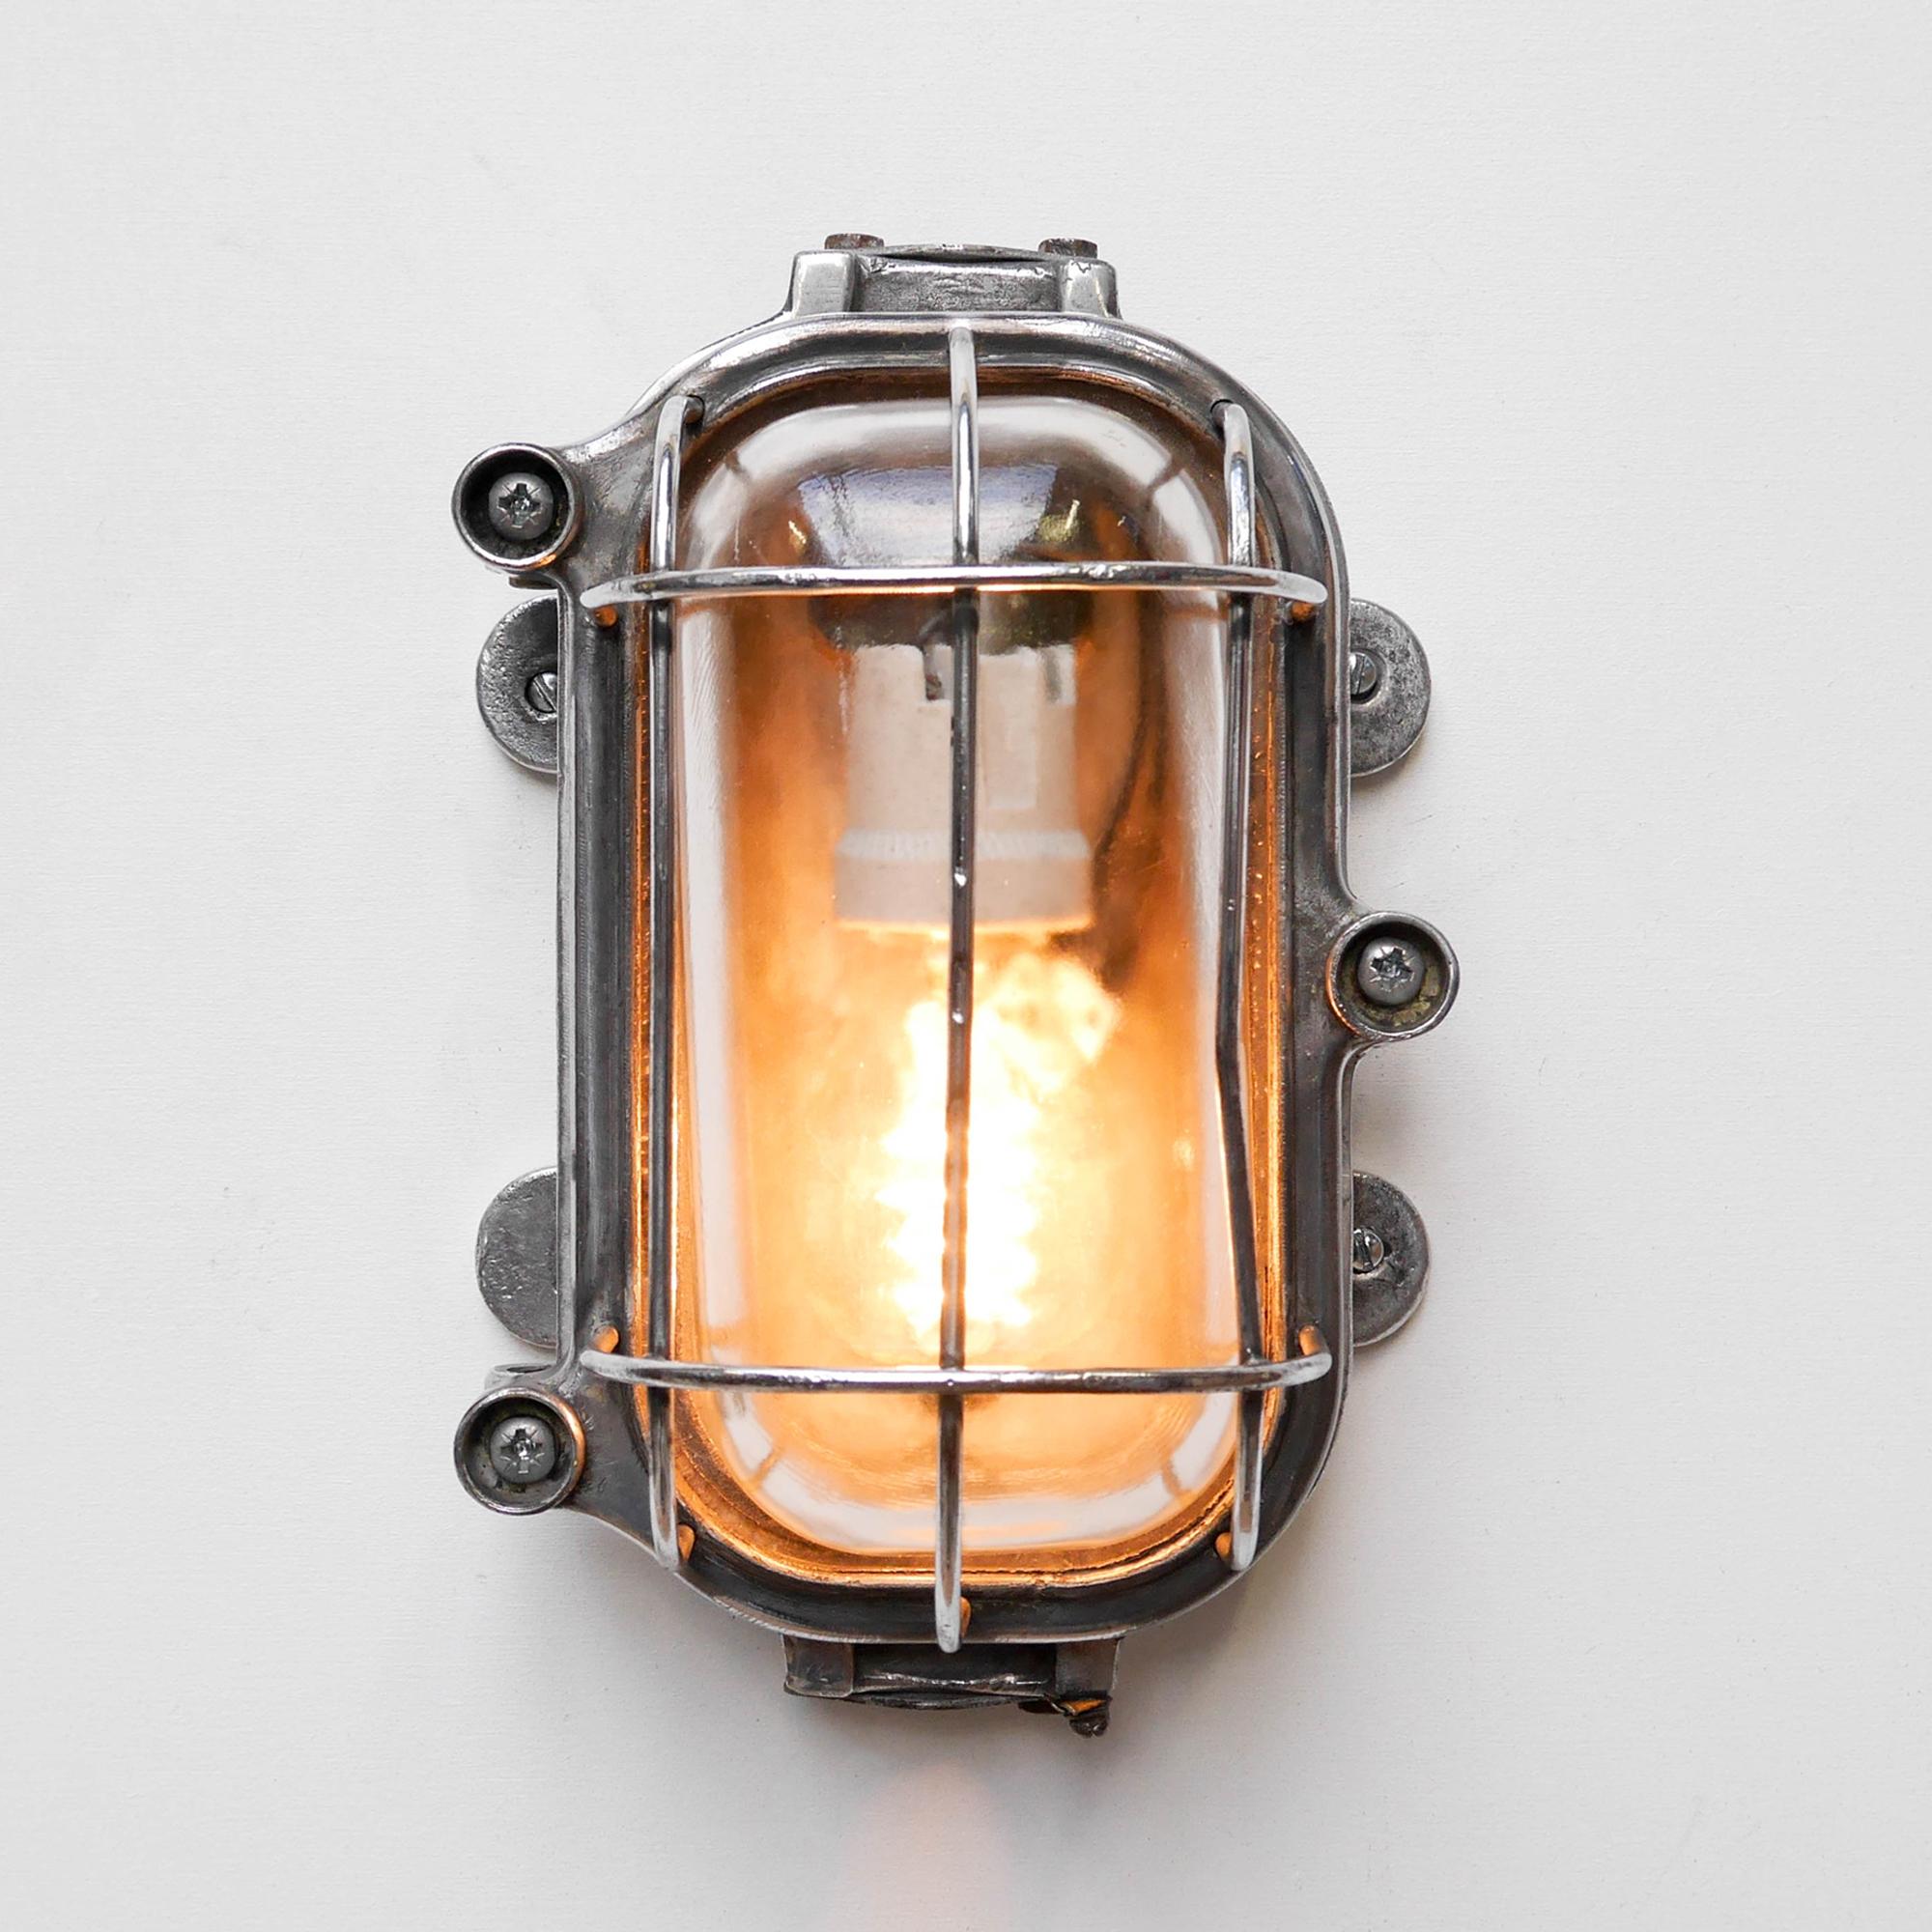 Old industrial wall light, from us. In die- cast aluminium, picked and polished, curved fence protecting a thick transparent glass. Put it horizontally or vertically!